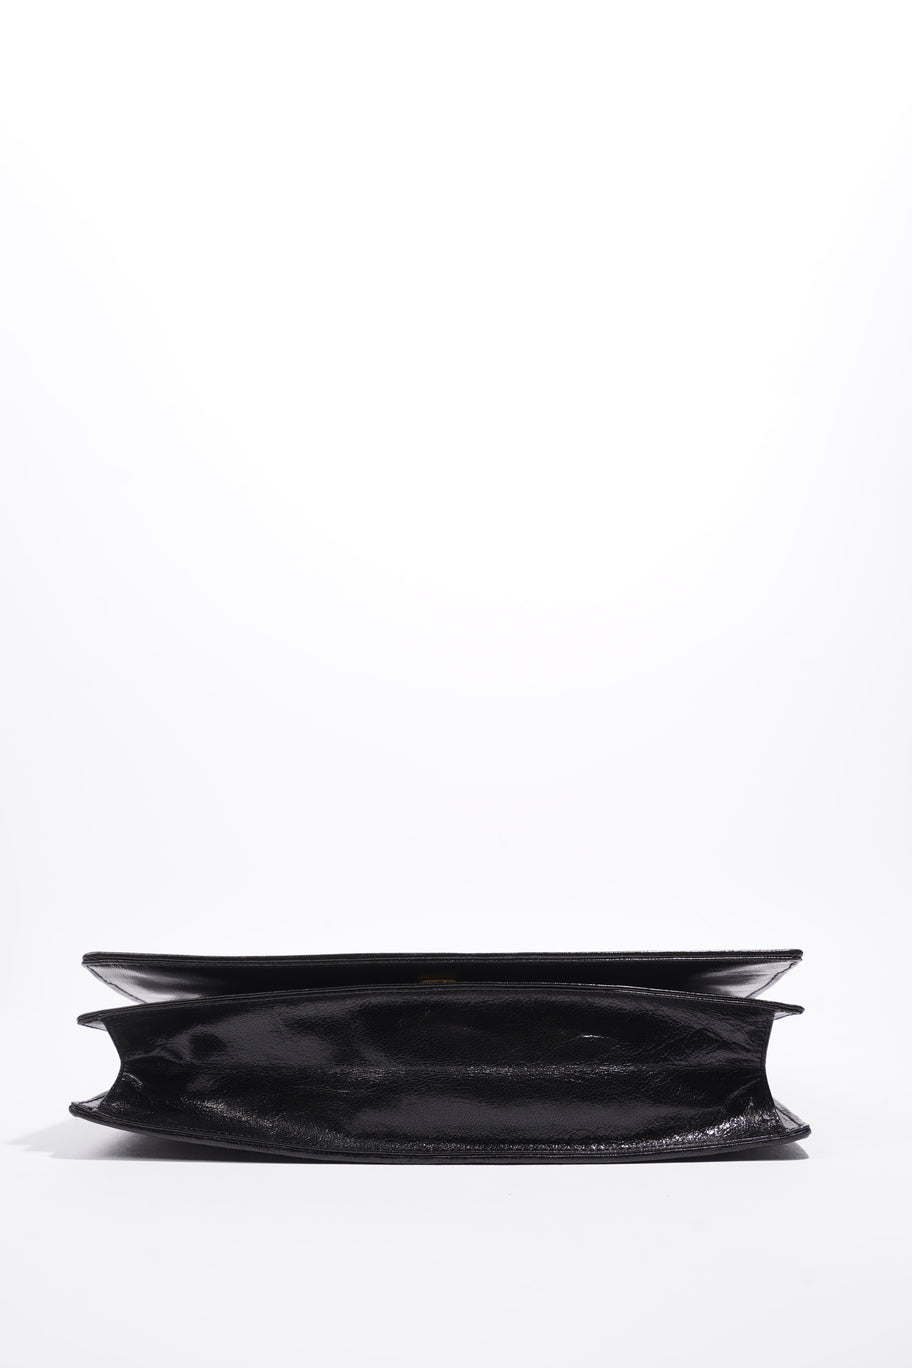 Clutch With Strap Black Leather Image 7